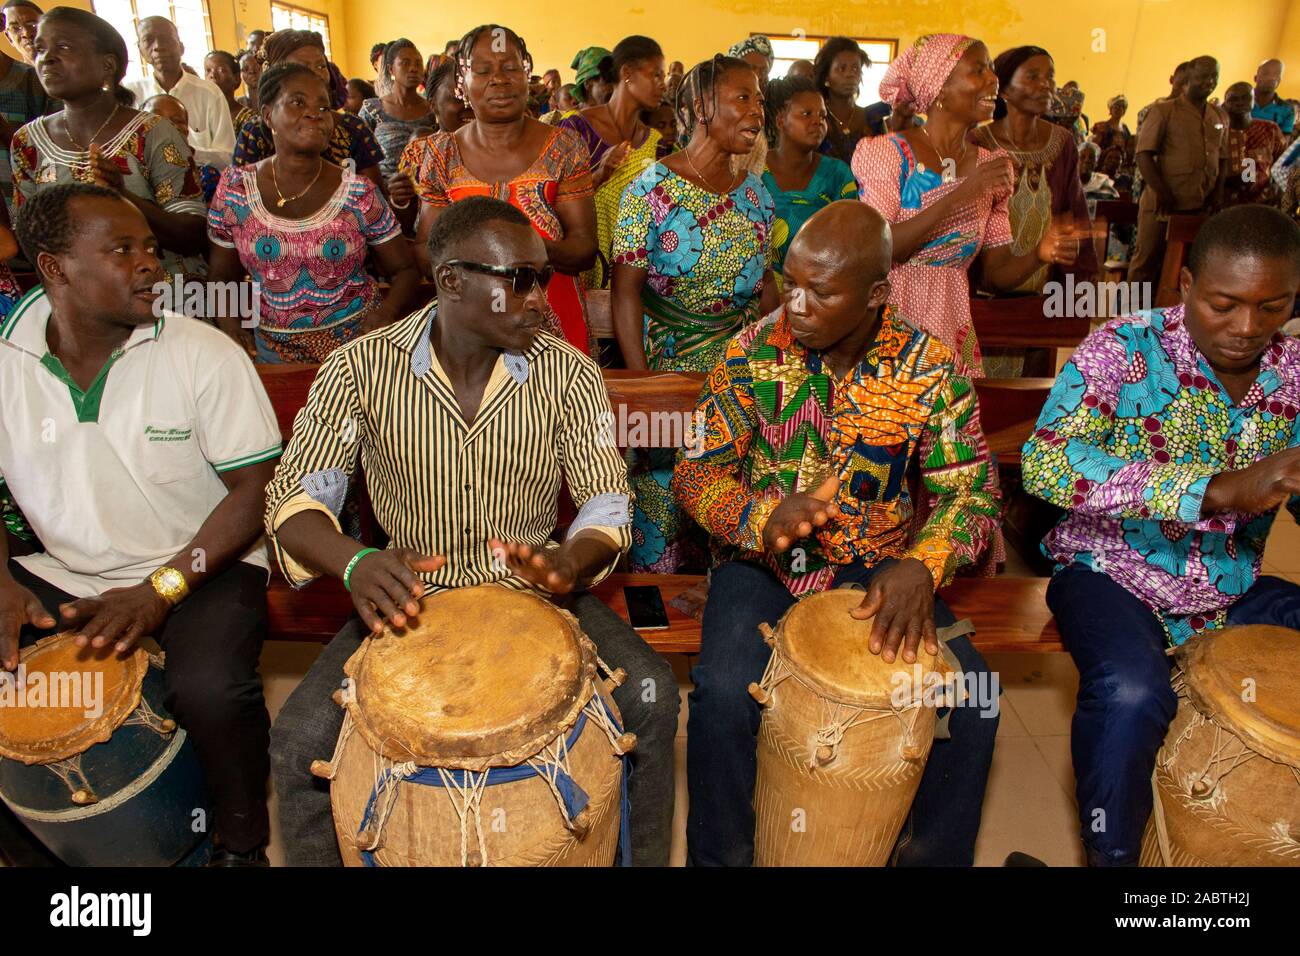 Tambour stock image. Image of performing, musical, africa - 14399863